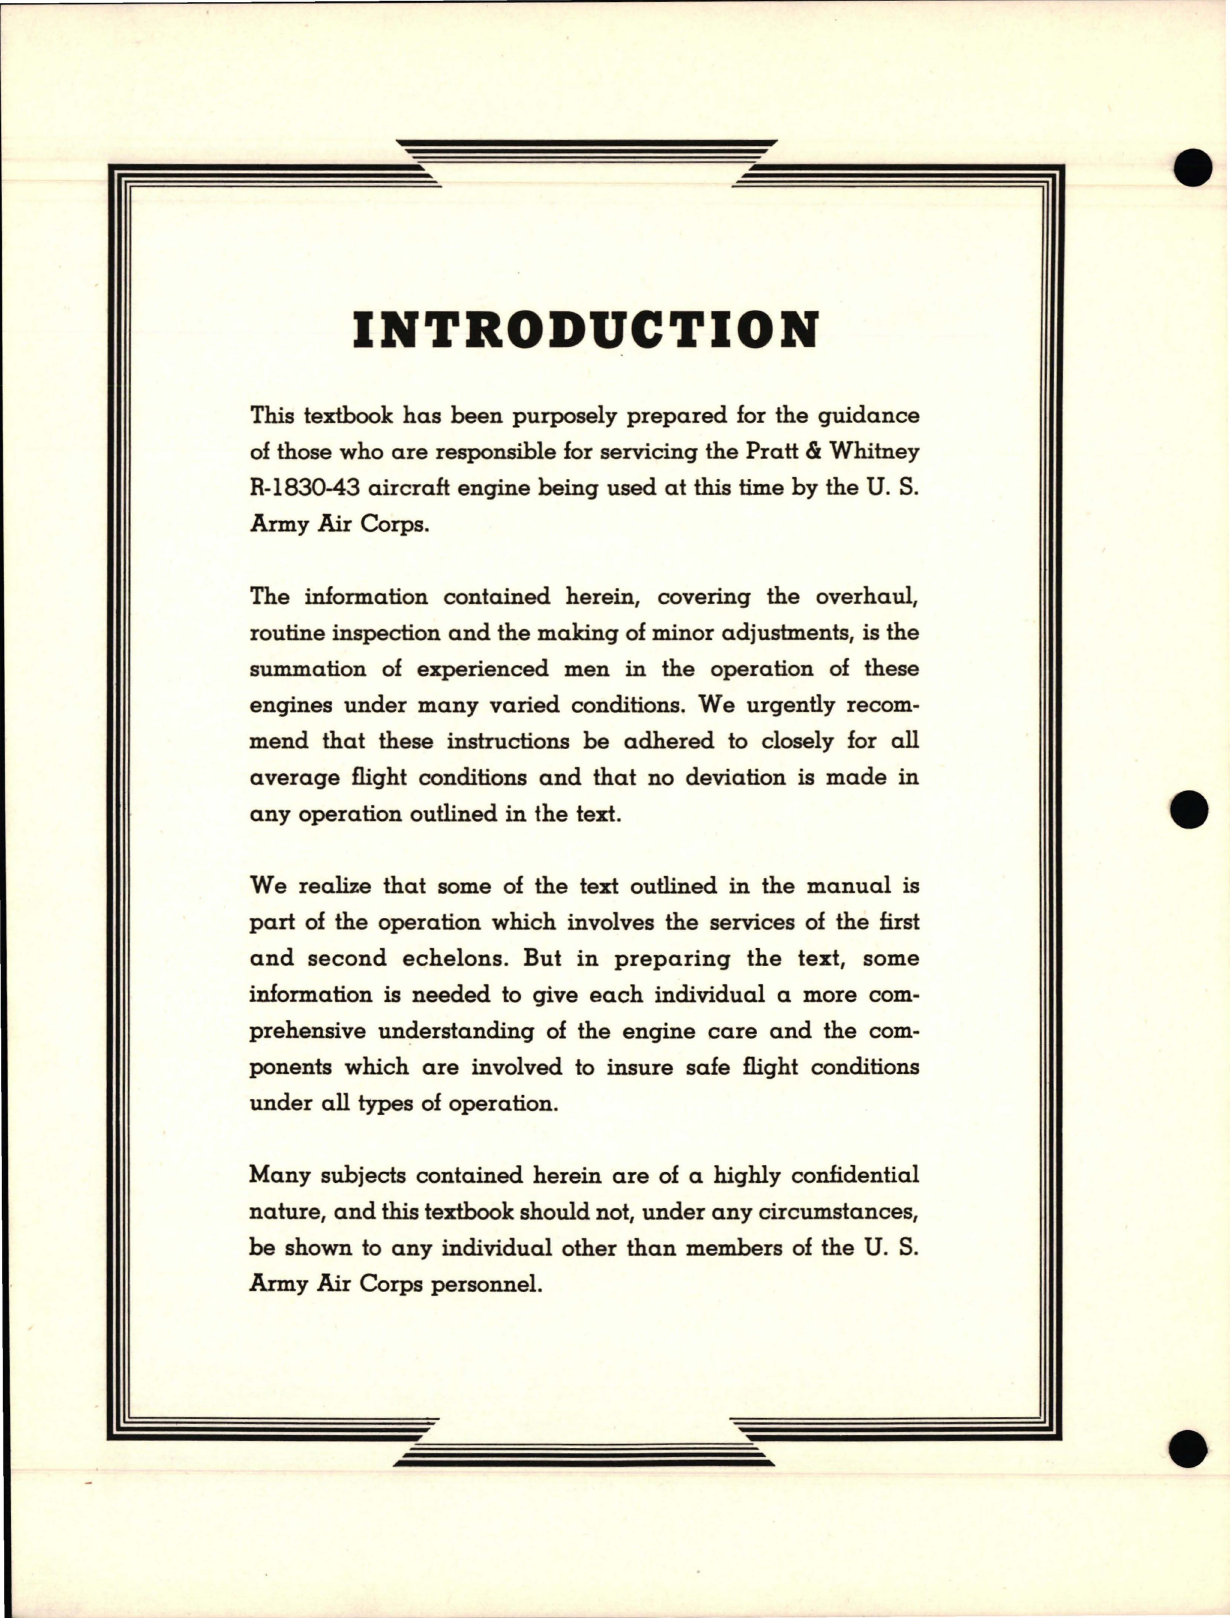 Sample page 5 from AirCorps Library document: Training Manual for Pratt & Whitney Model R-1830-43 Engine